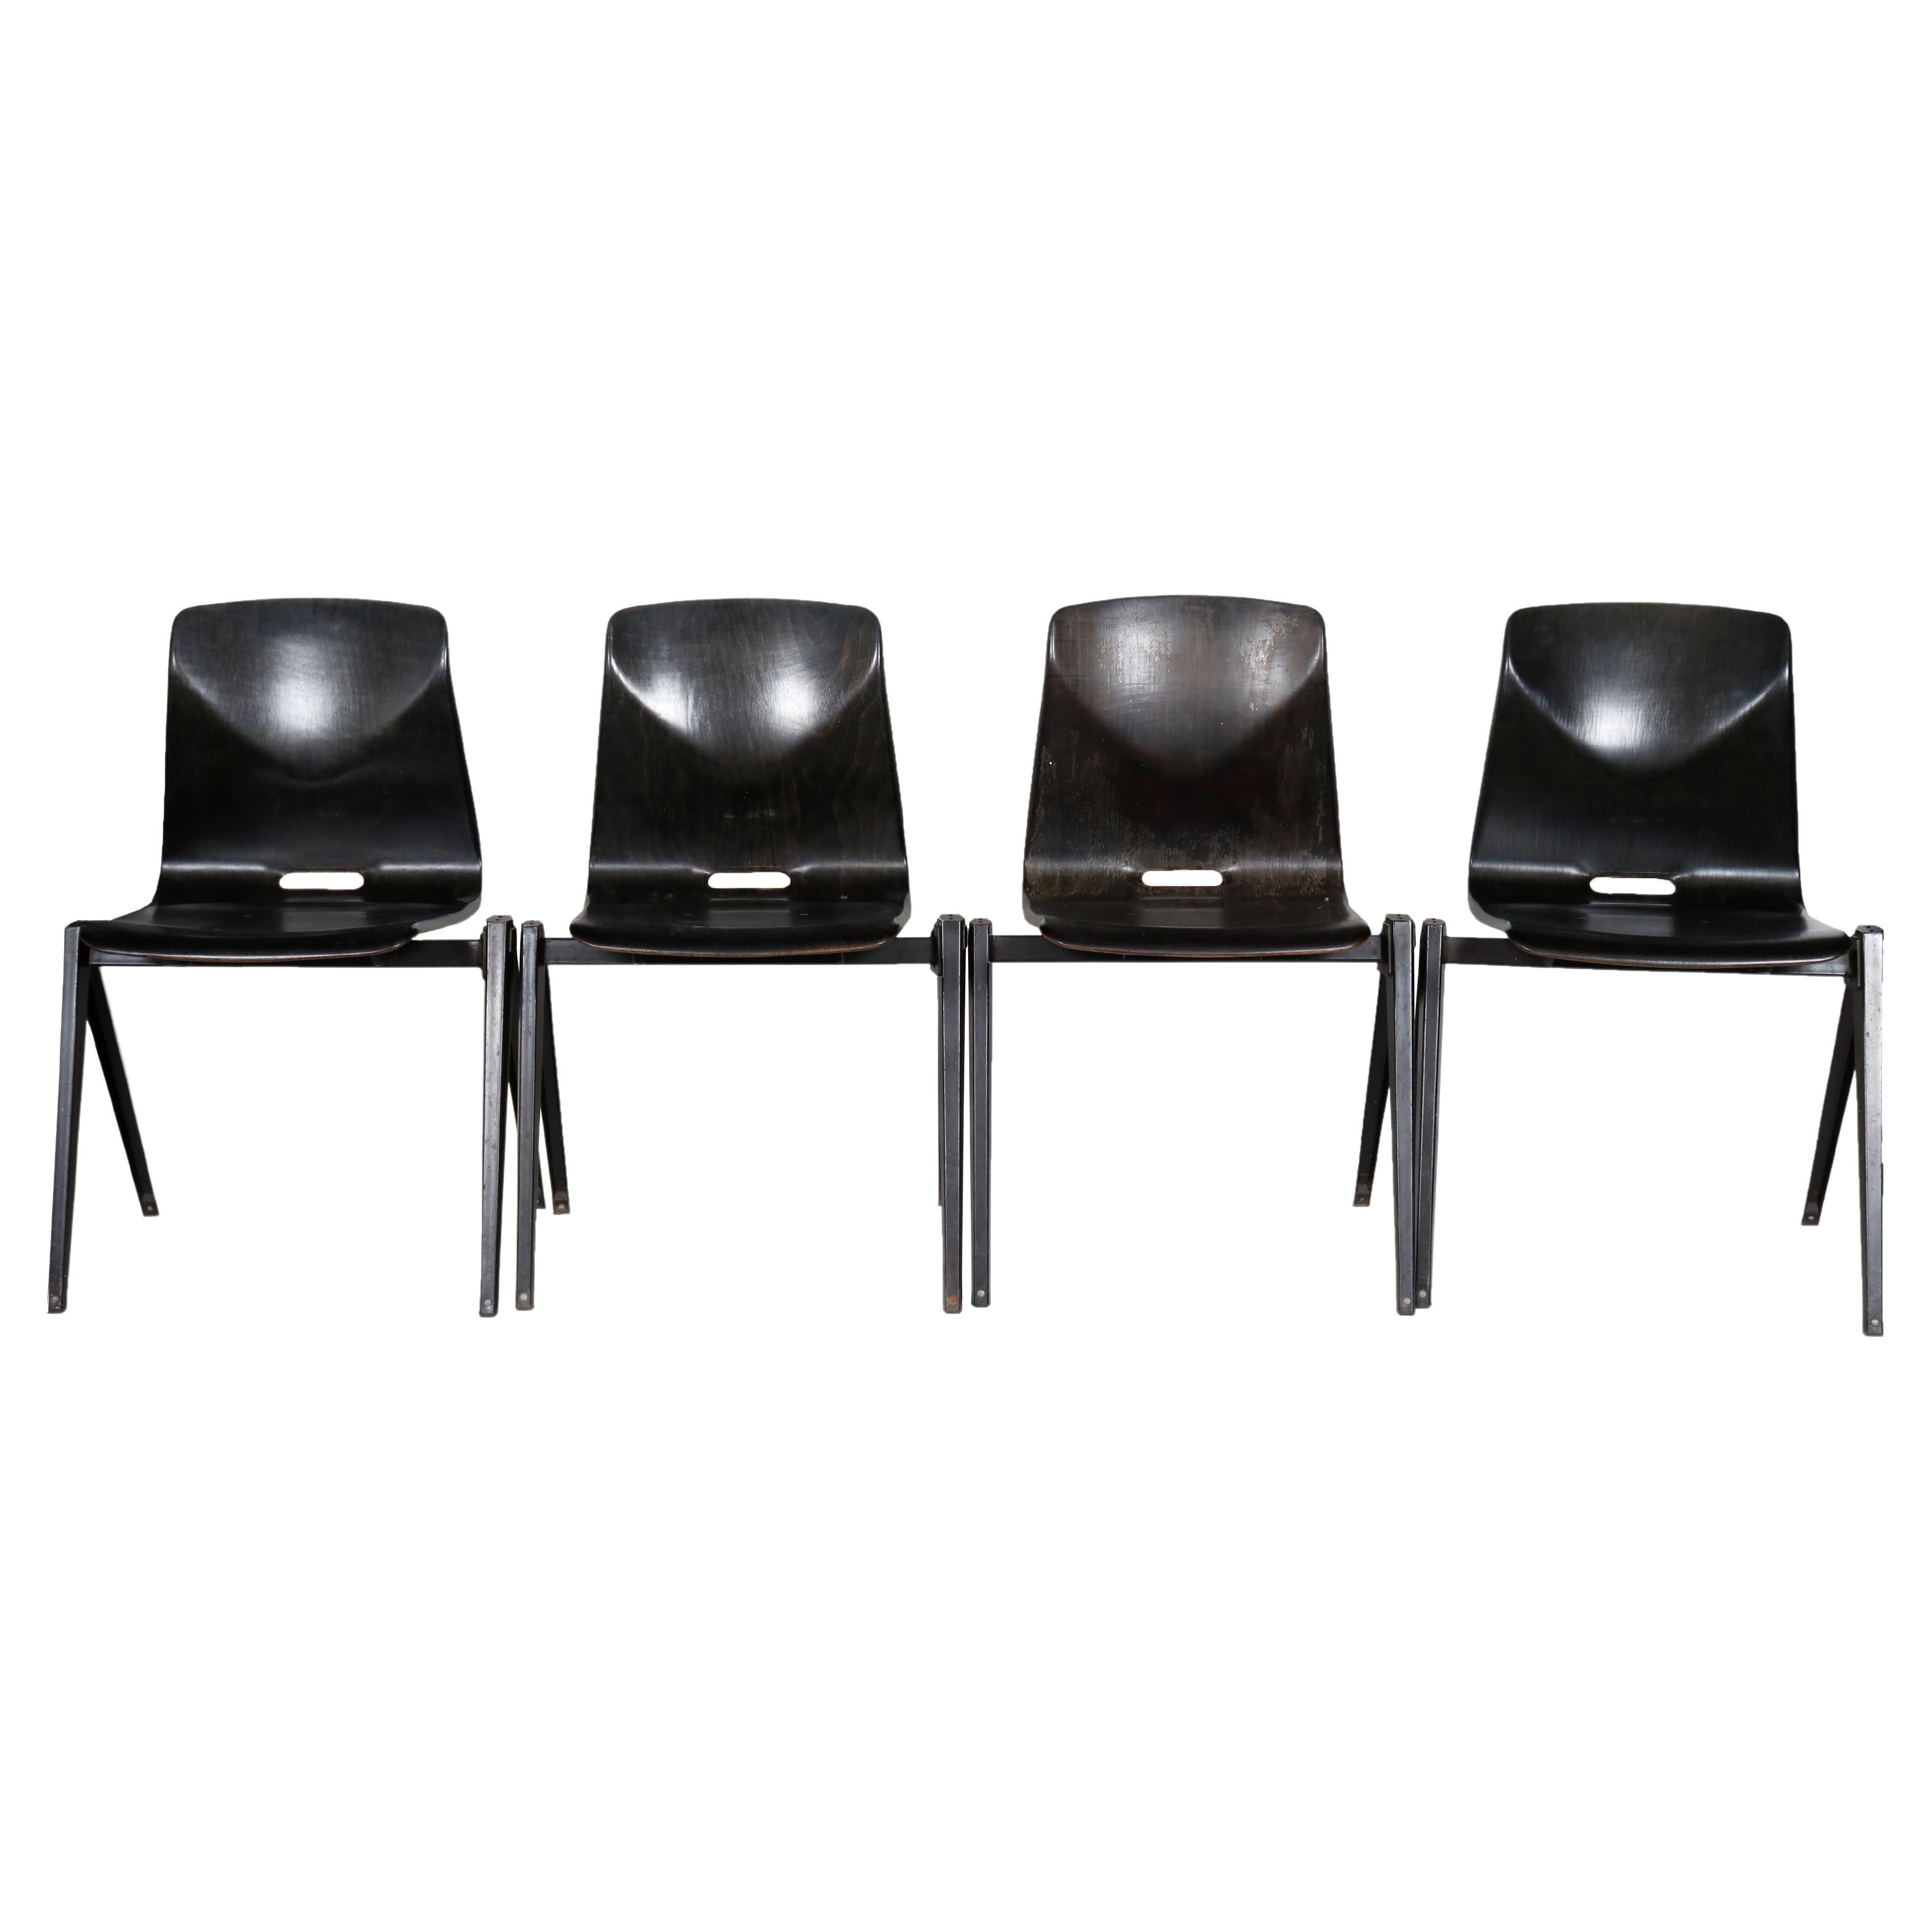 Set of 4 (four) Thur-Op-Seat chairs set designed by Elmar Flötotto for Pagholz.  Model 522. 

West Germany, circa 1960.

The chairs feature an ergonomic dark brown/black stained bentwood seat complemented by angular metal base in patinated